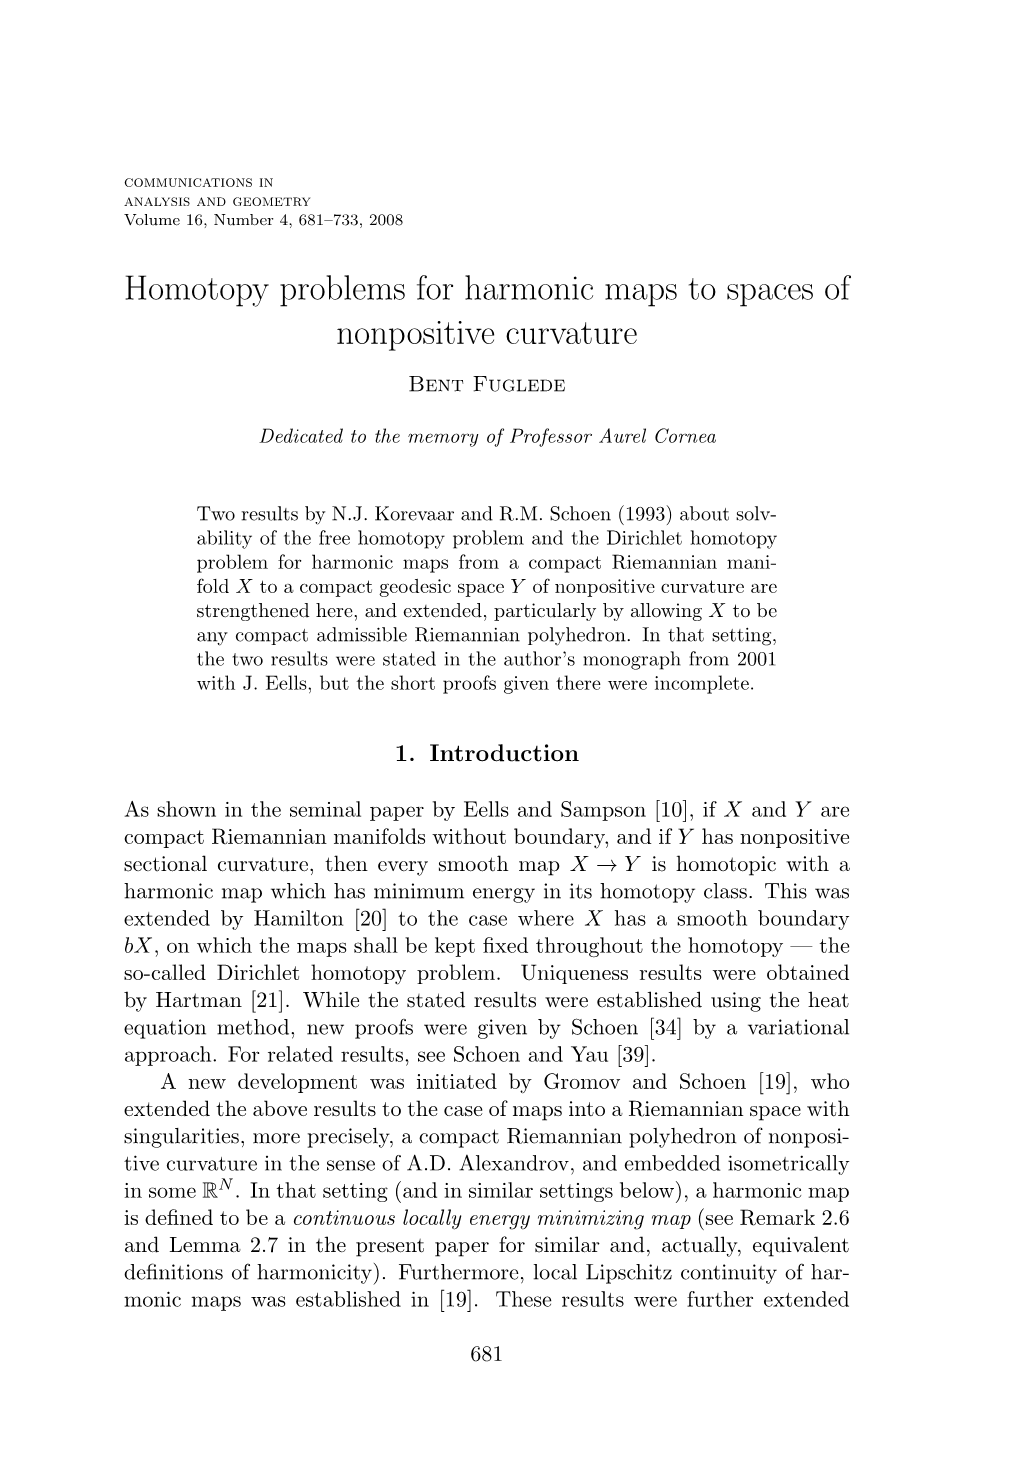 Homotopy Problems for Harmonic Maps to Spaces of Nonpositive Curvature Bent Fuglede